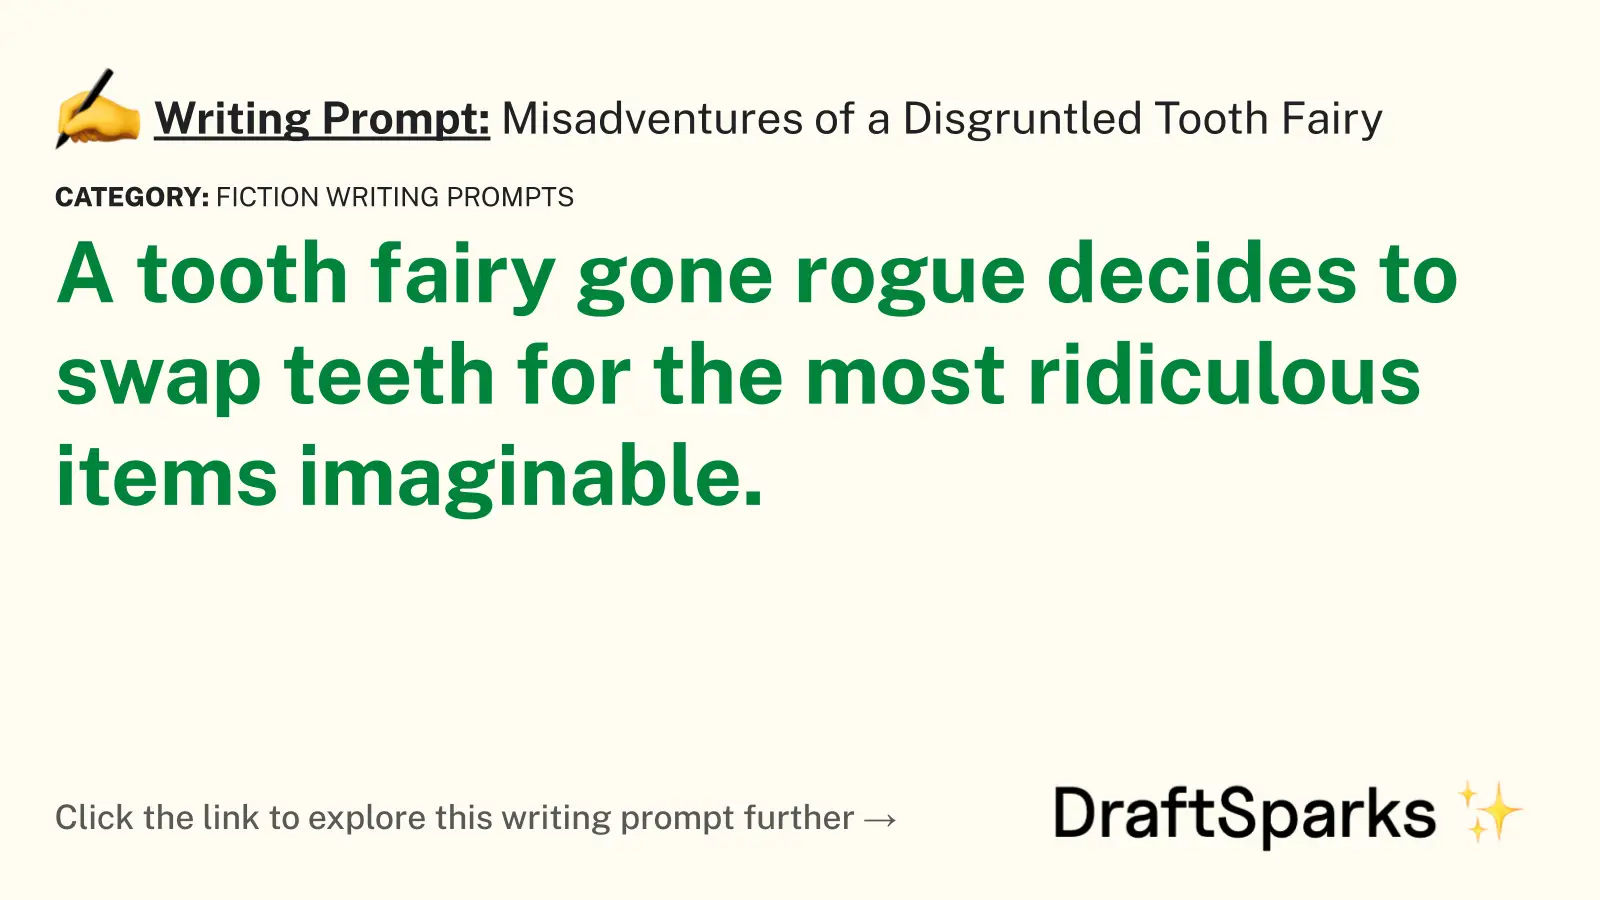 Misadventures of a Disgruntled Tooth Fairy